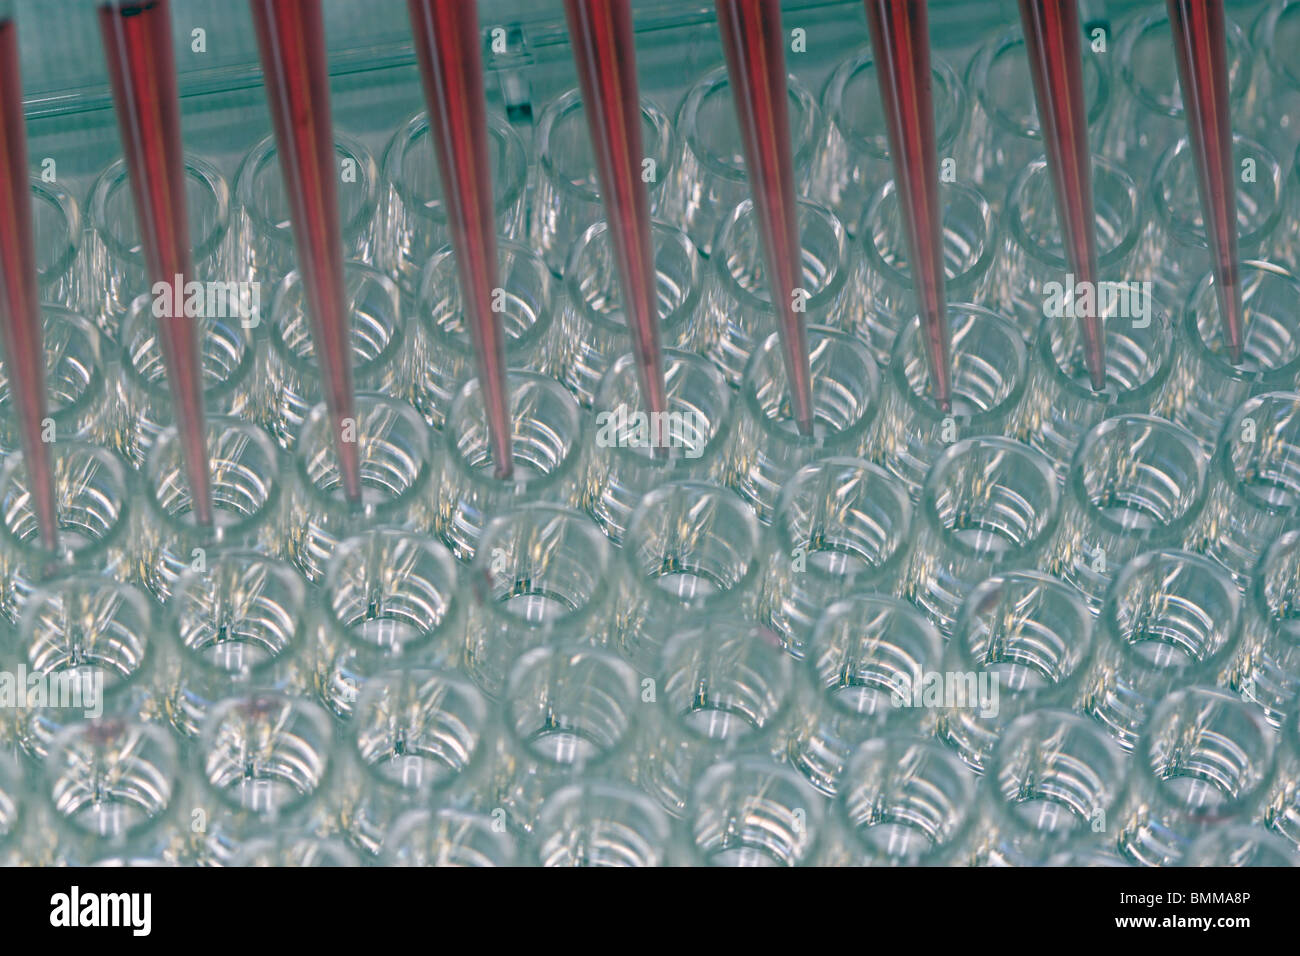 microplate with pipettor in close-up Stock Photo